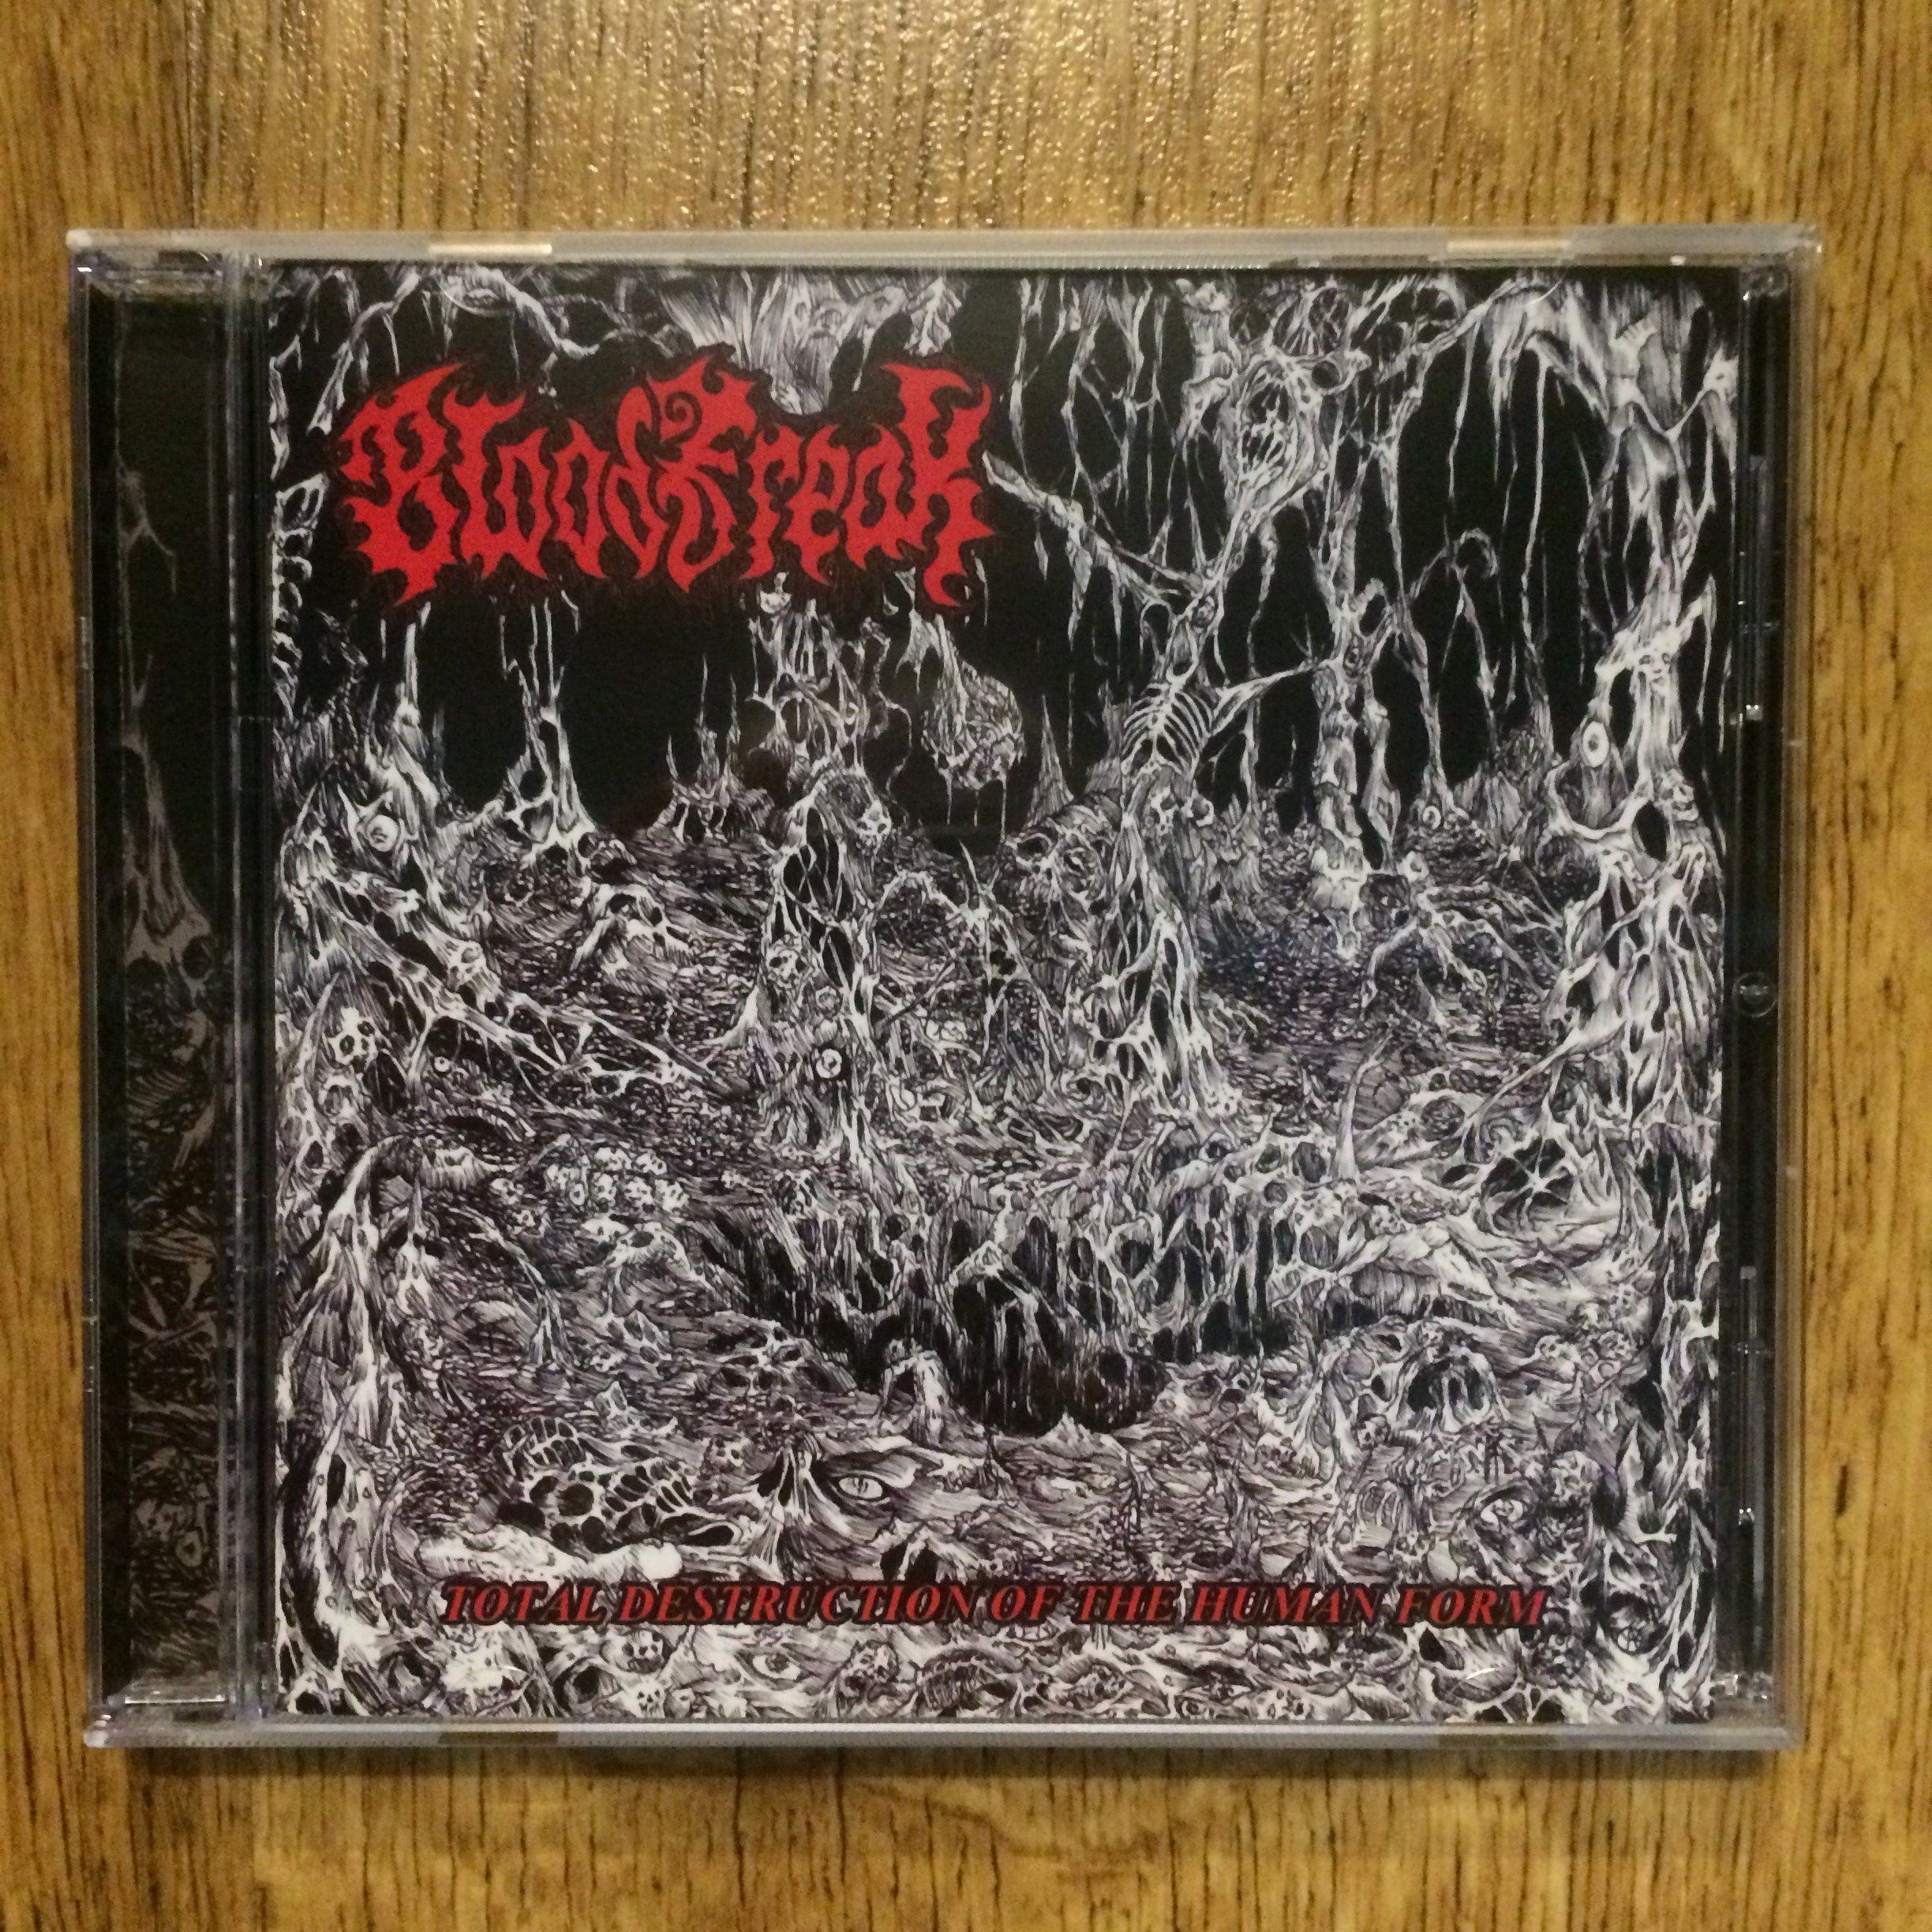 Photo of the Blood Freak - "Total Destruction of the Human Form" CD